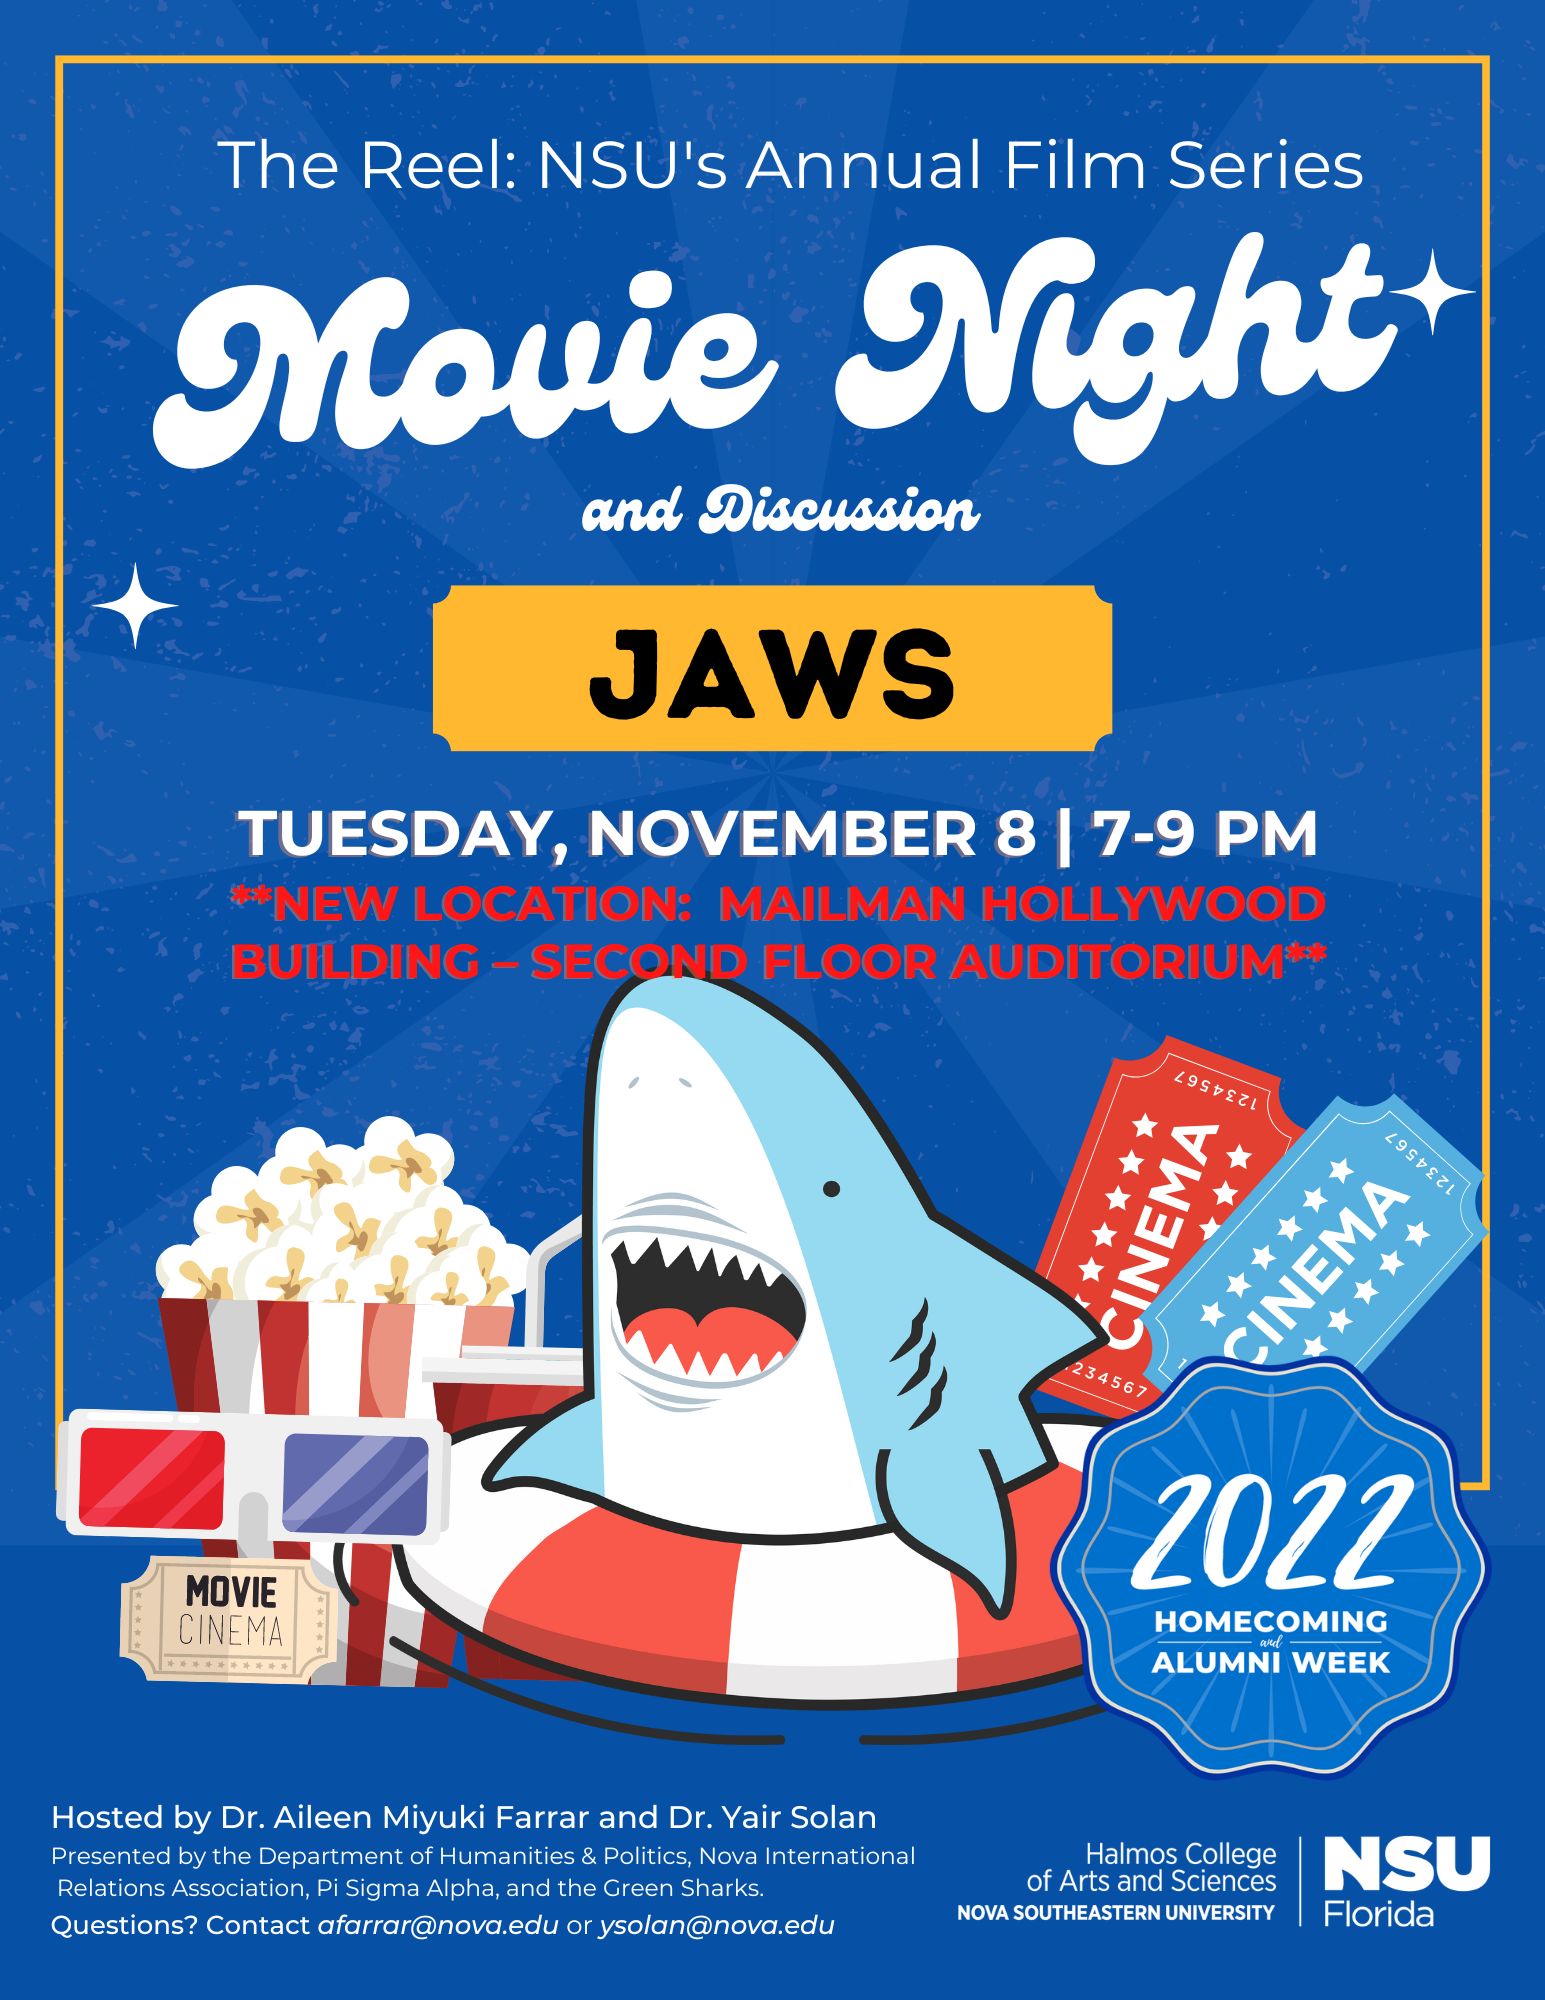 2022 Movie Night flyer inviting people to come out to watch a movie